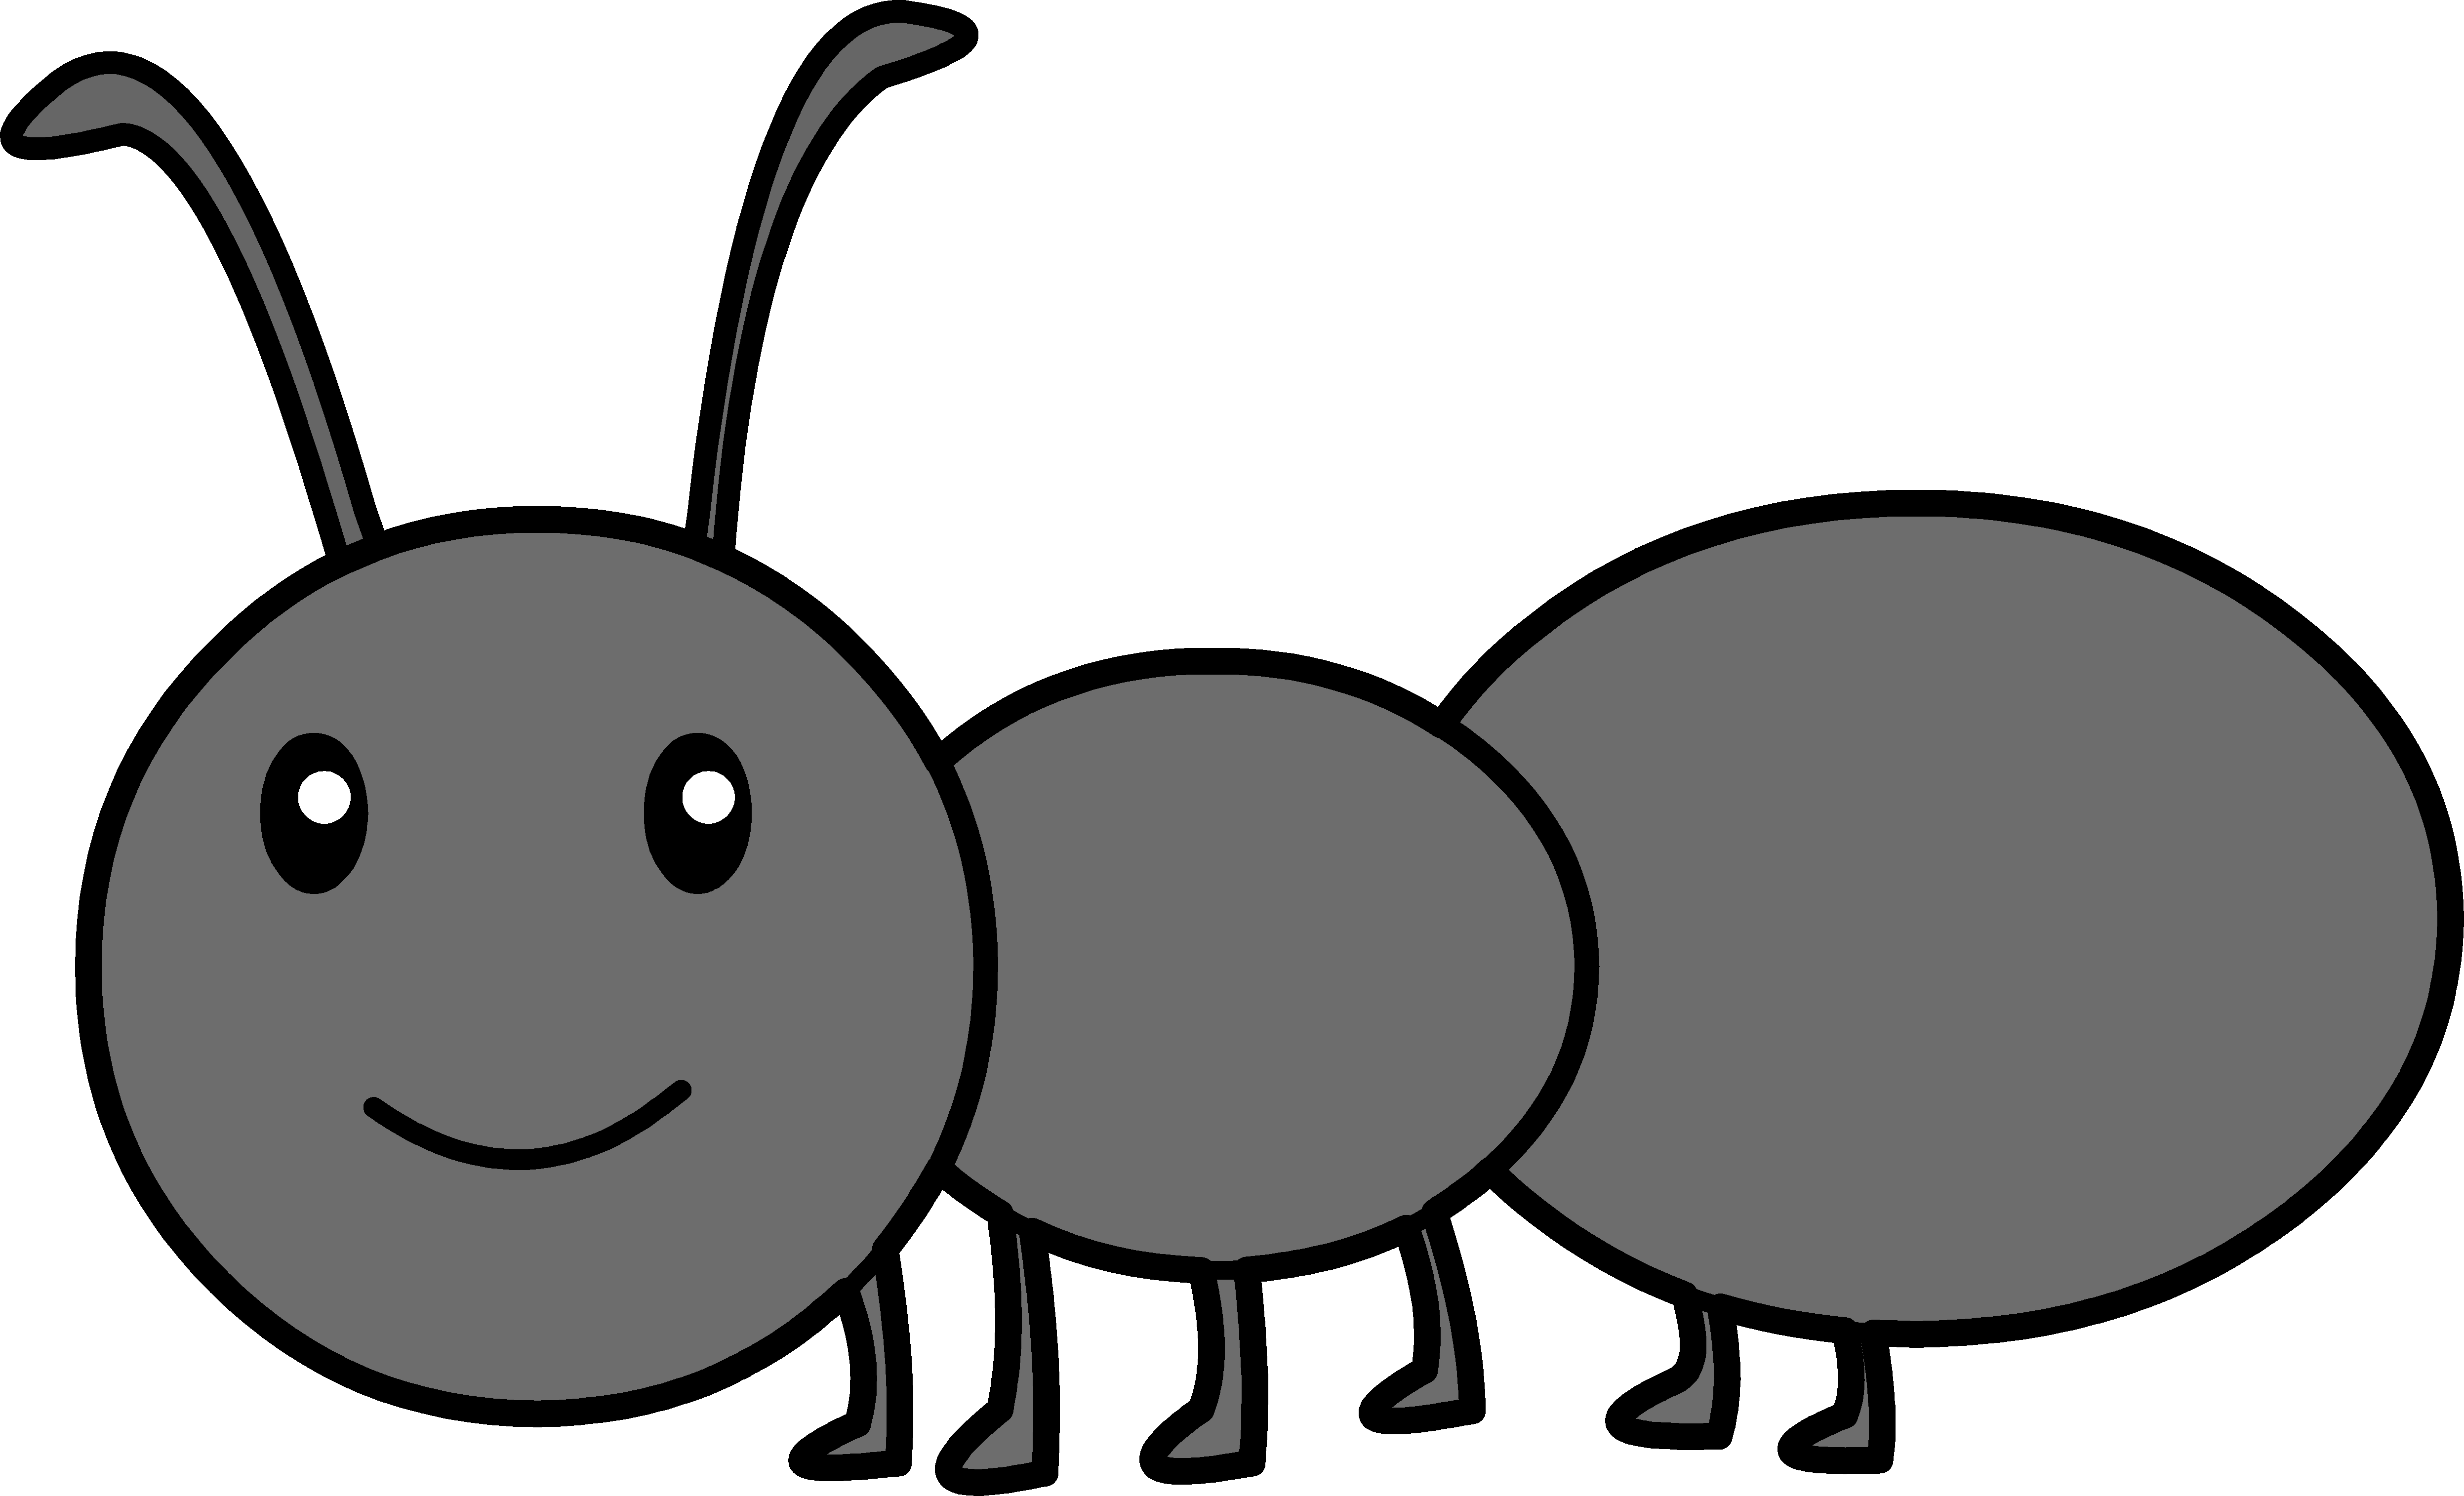 Ants clipart #12, Download drawings